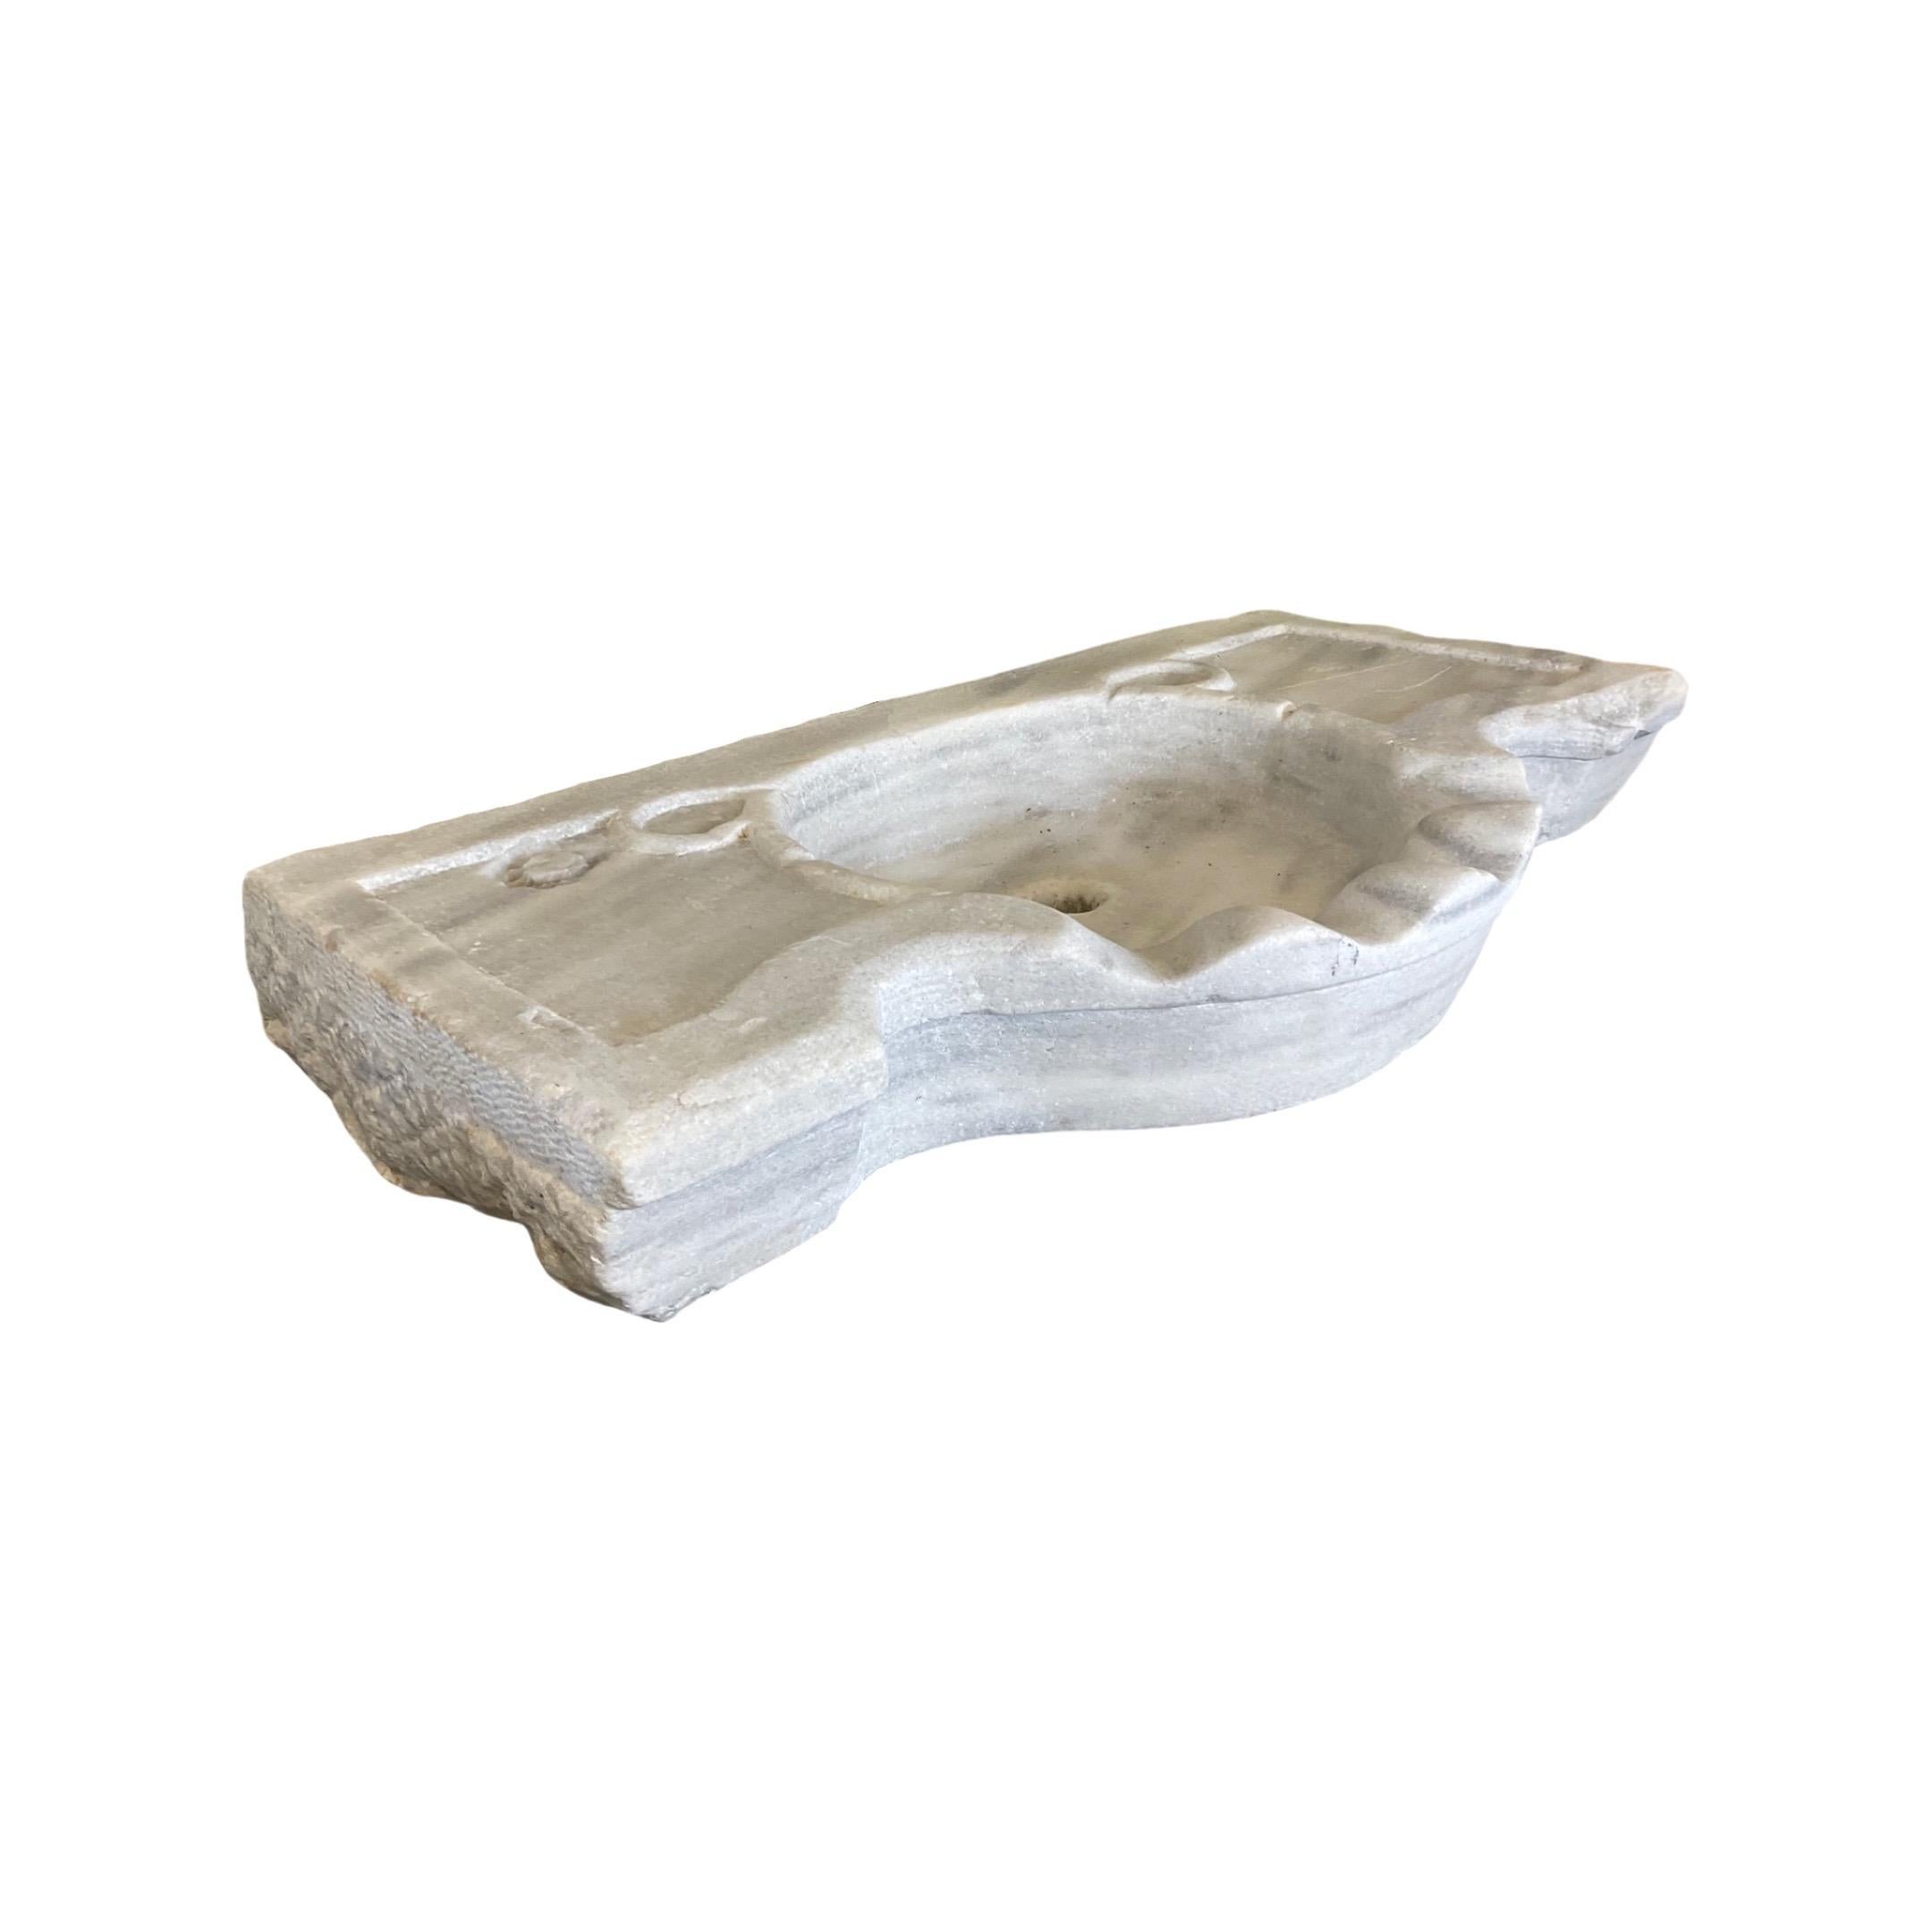 This French white marble Sink is crafted using 18th century techniques for a classic, elegant look. Its rectangular shape is sleek and modern, perfect for adding a touch of sophistication to any bathroom. The white marble is resistant to staining